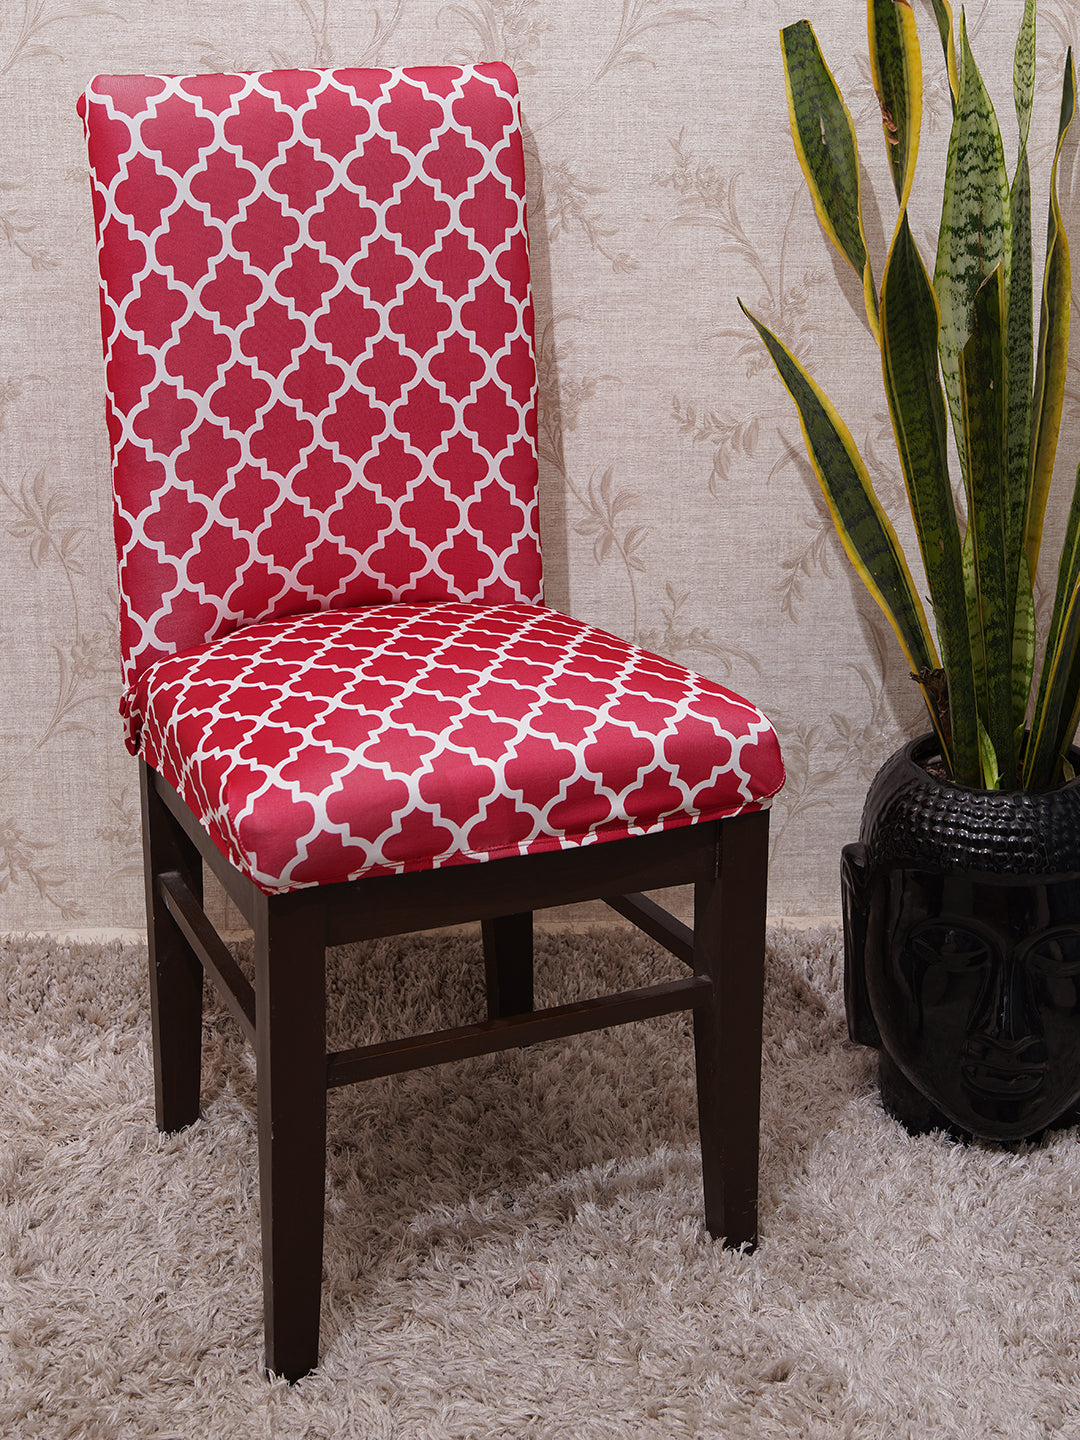 chairs slipcovers, chair covers, dining table covers set- divine red dimond..